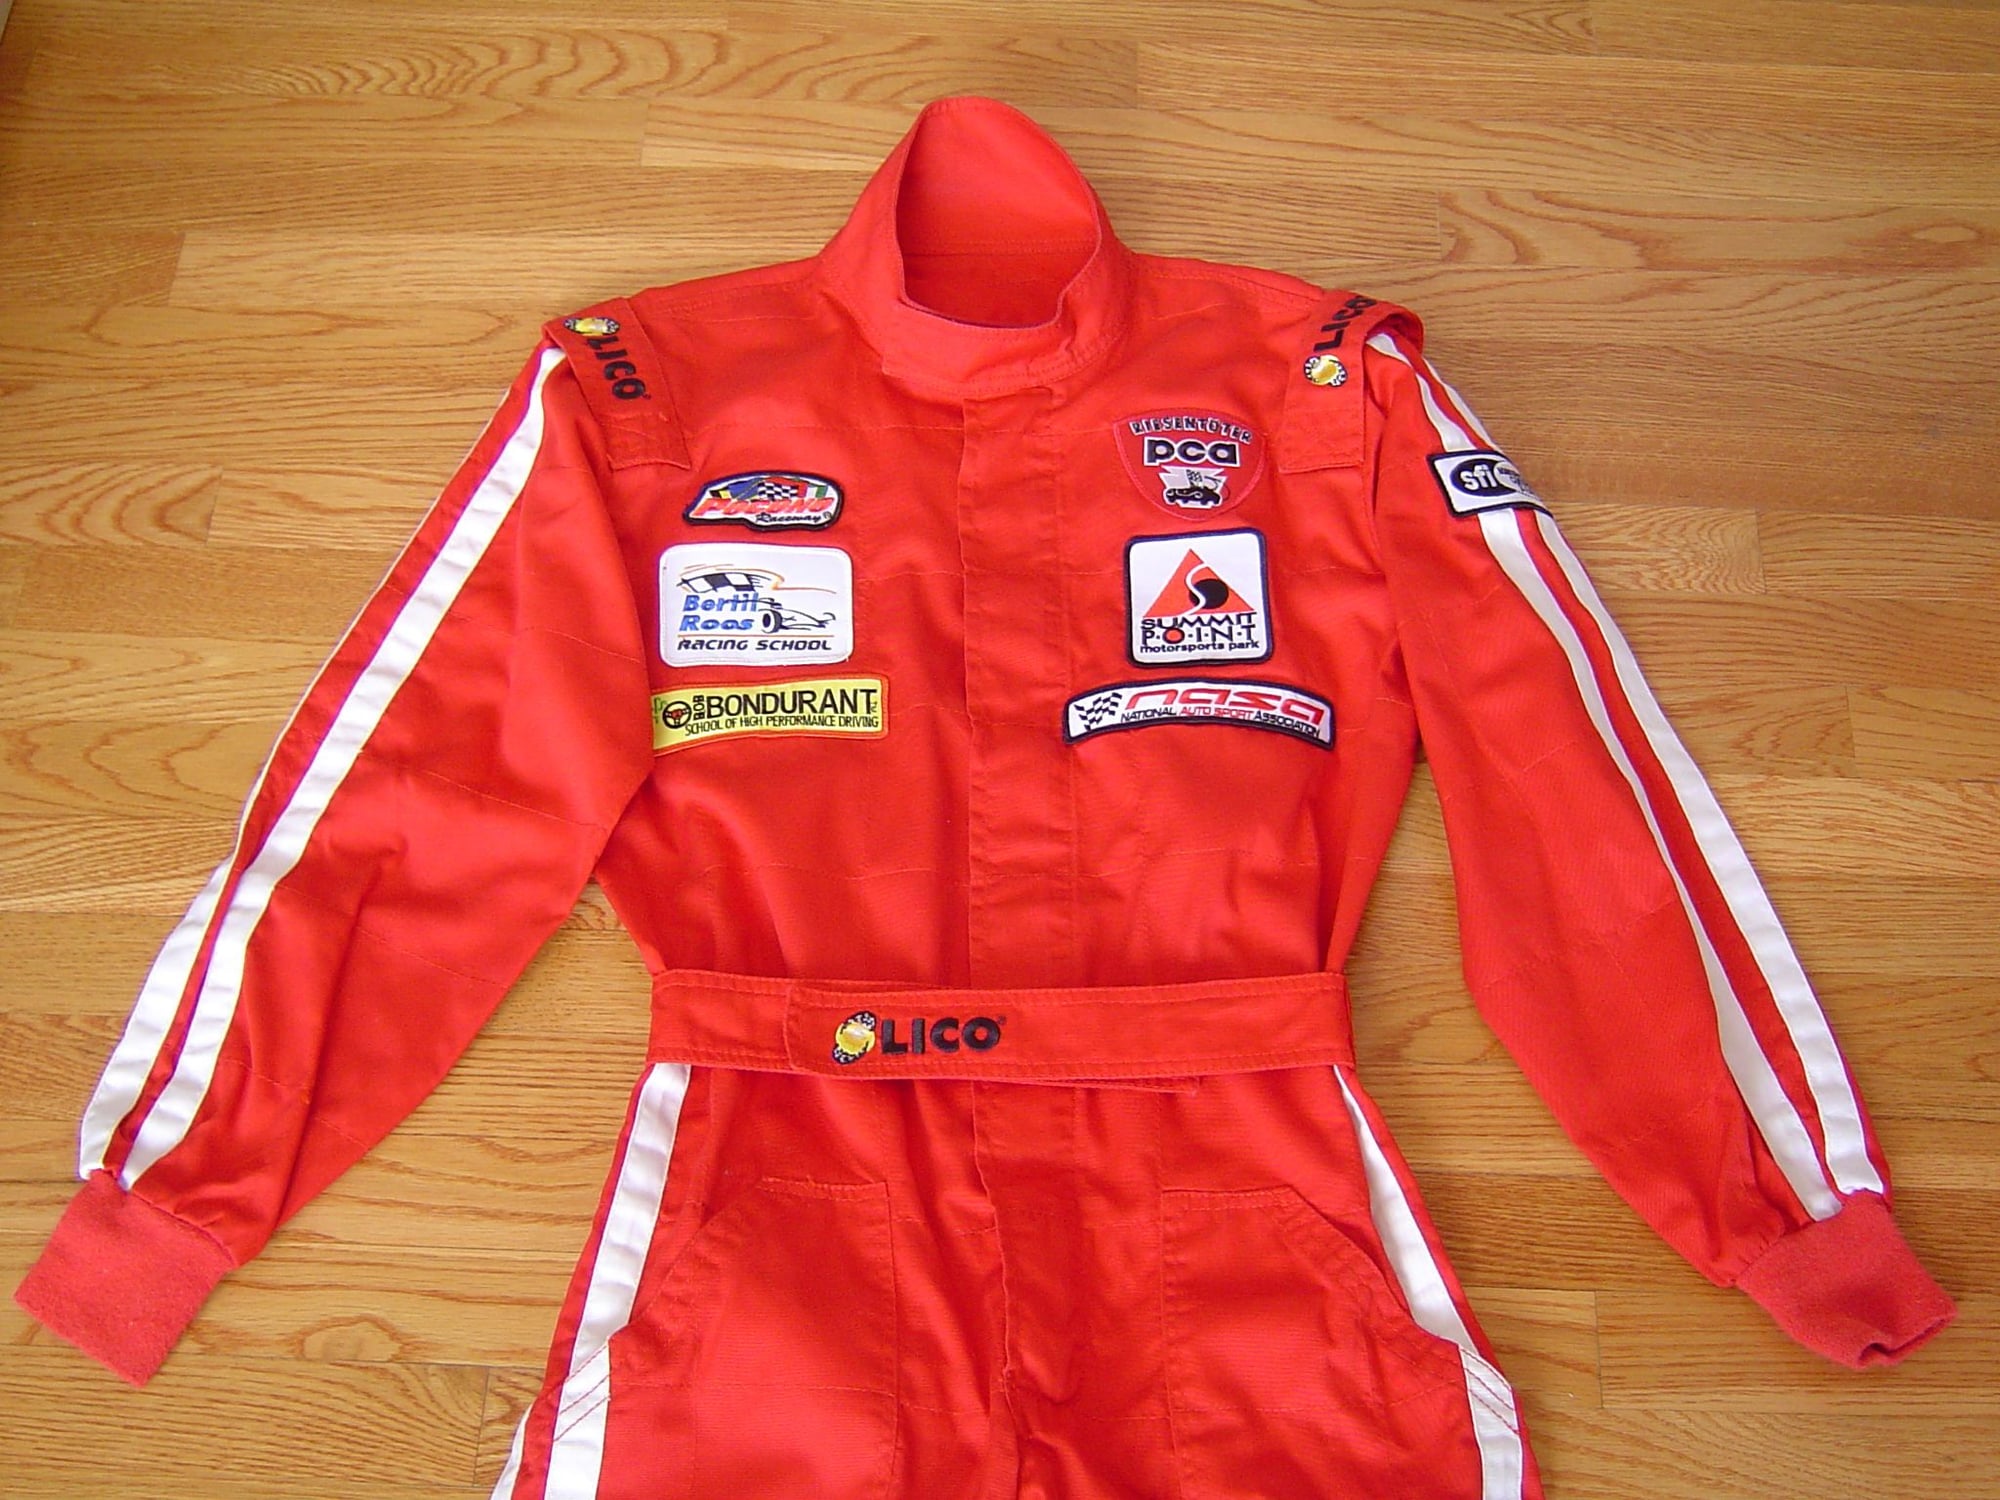 Miscellaneous - LICO RACING SUIT + Accessories, VERY SHARP! - Used - Allentown, PA 18106, United States